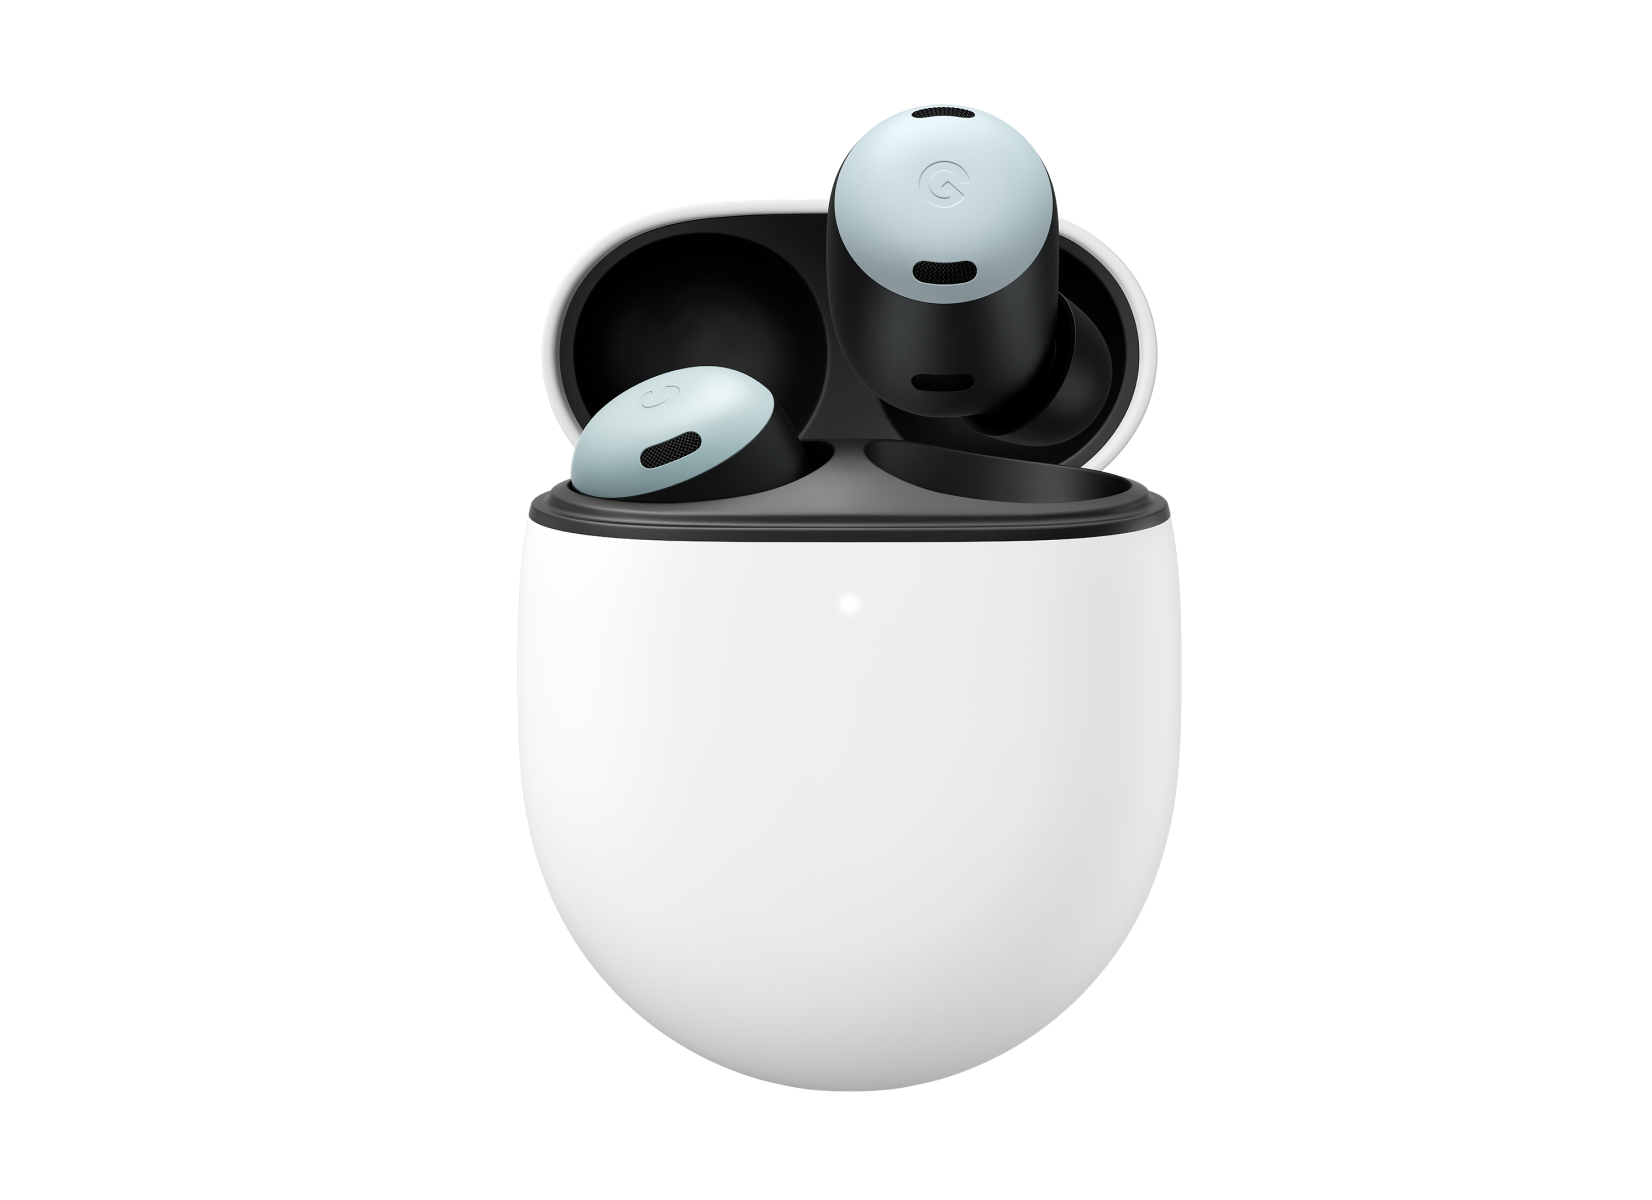 A pair of Pixel Buds Pro in Fog, with one earbud tucked in the case and one floating above it